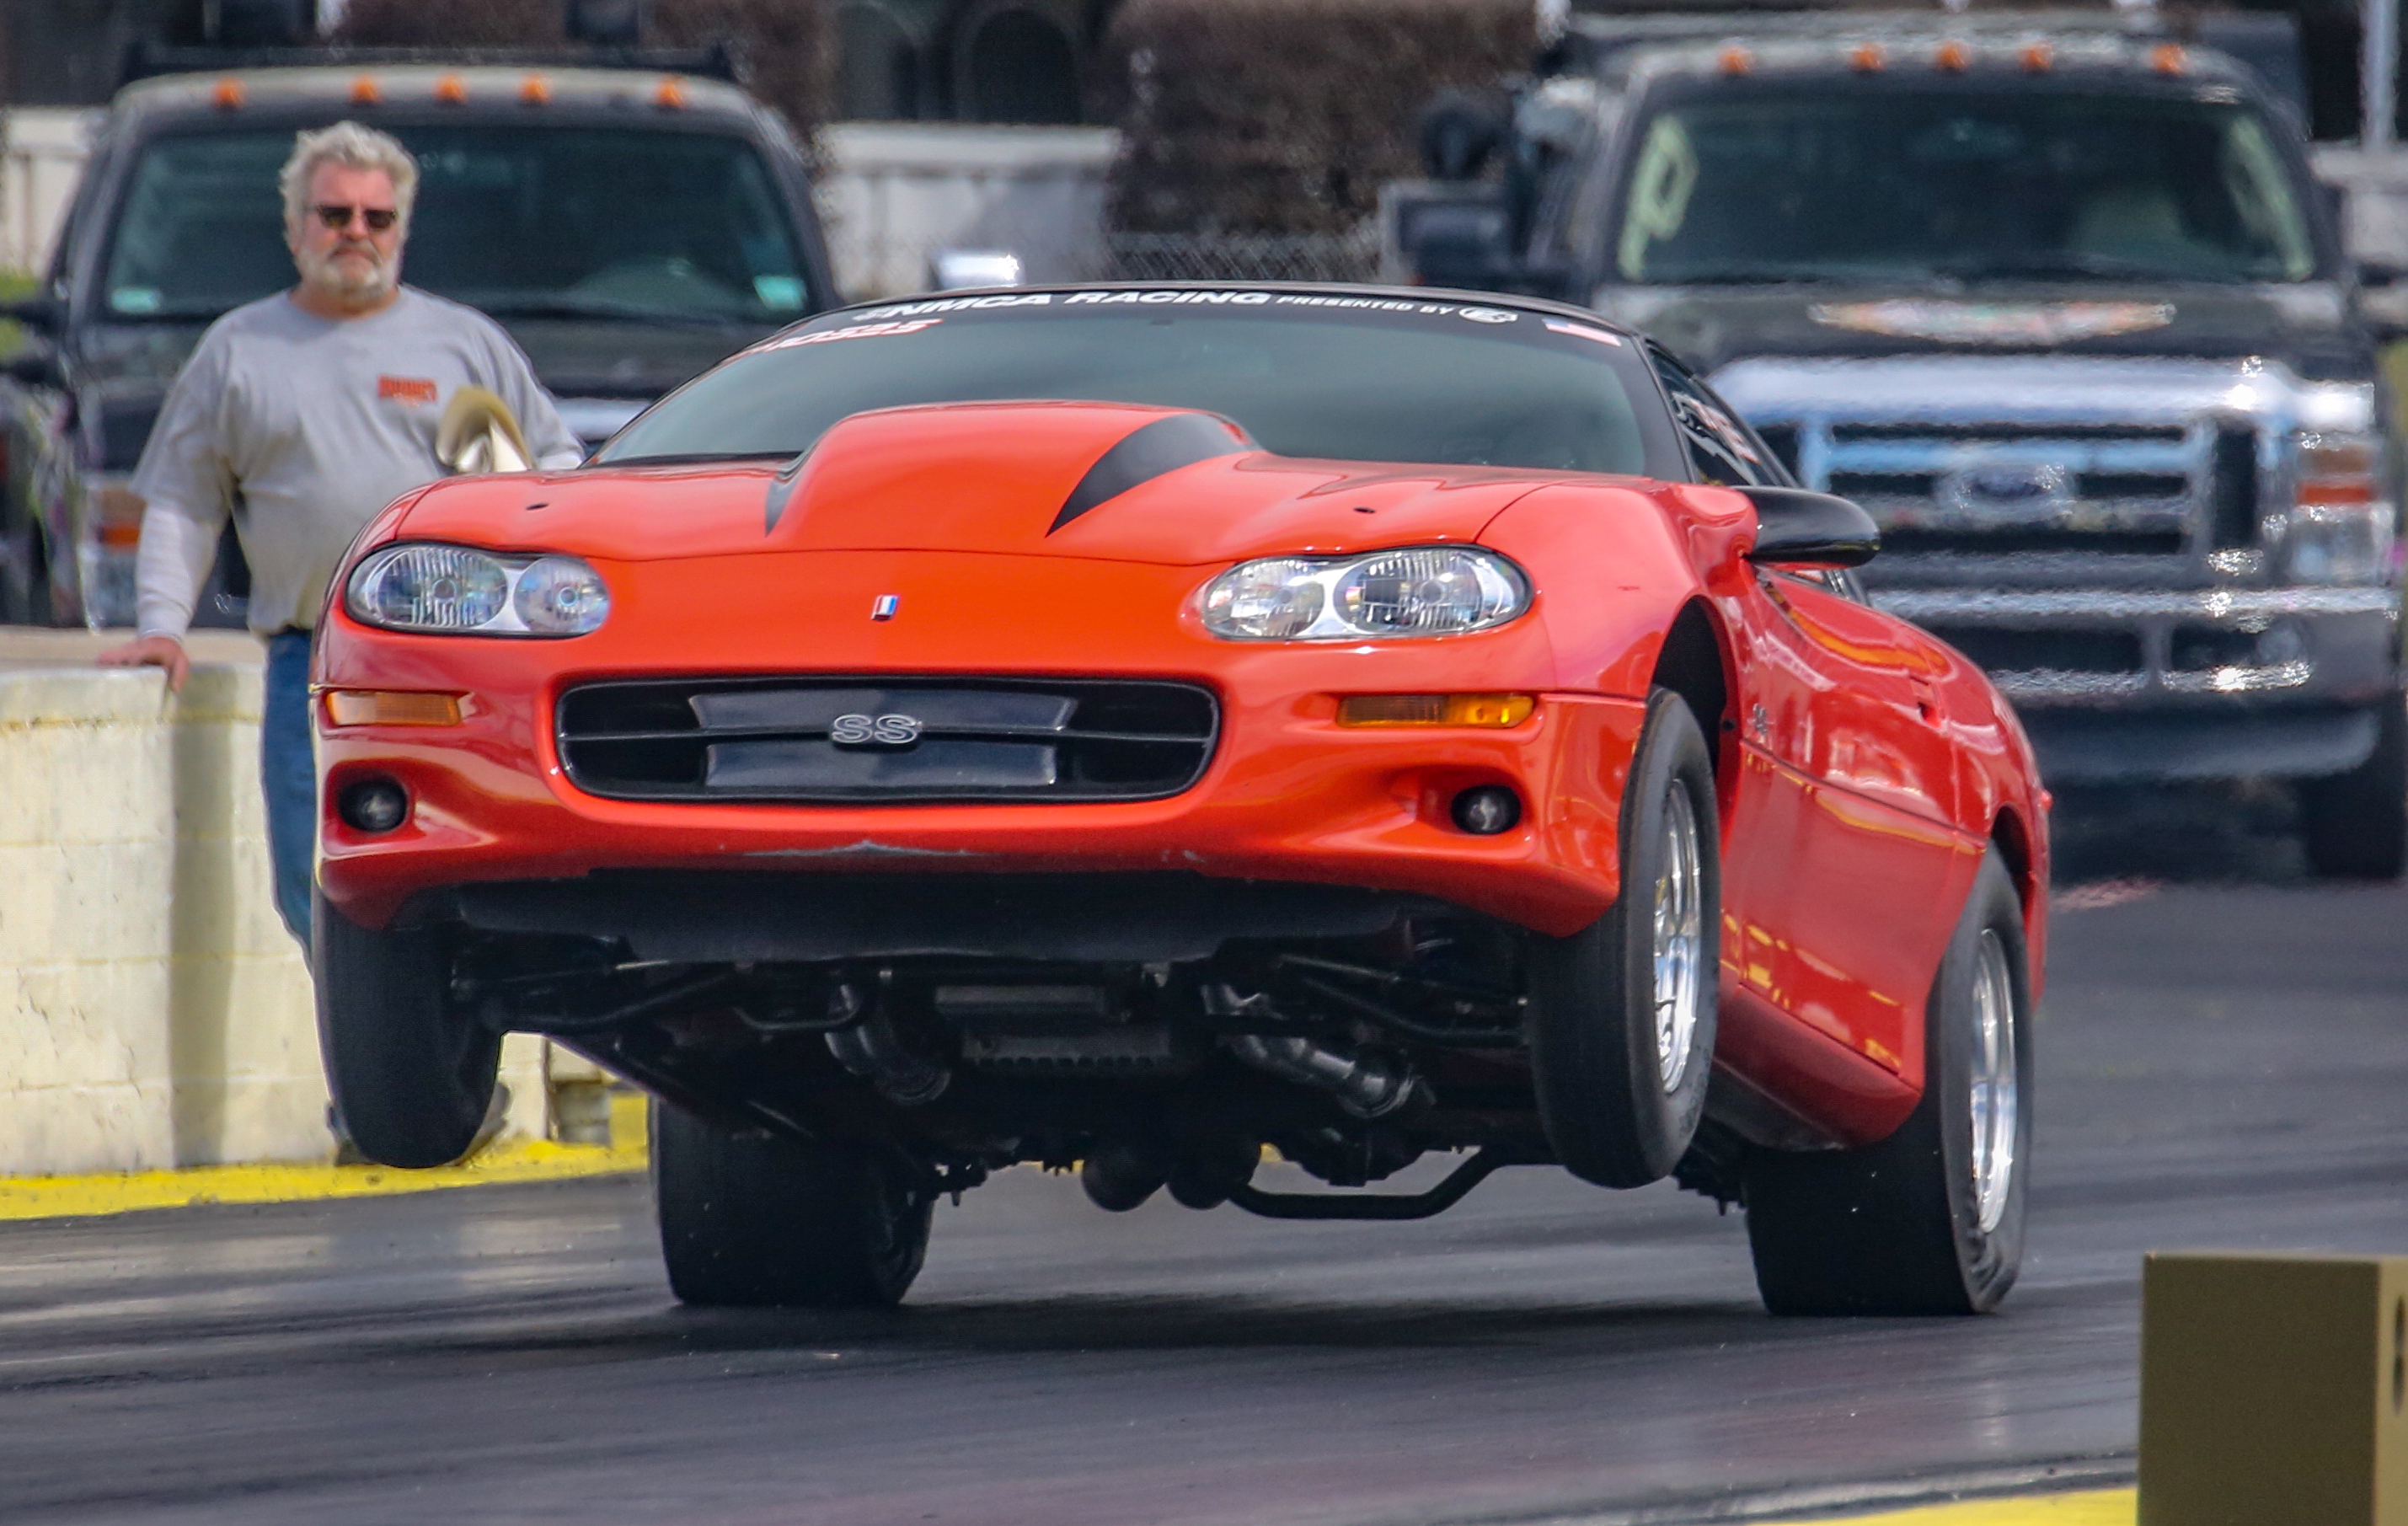 NMCA HOSTS 2019 CHEVROLET PERFORMANCE CHALLENG SERIES AT FIVE 2019 EVENTS ...